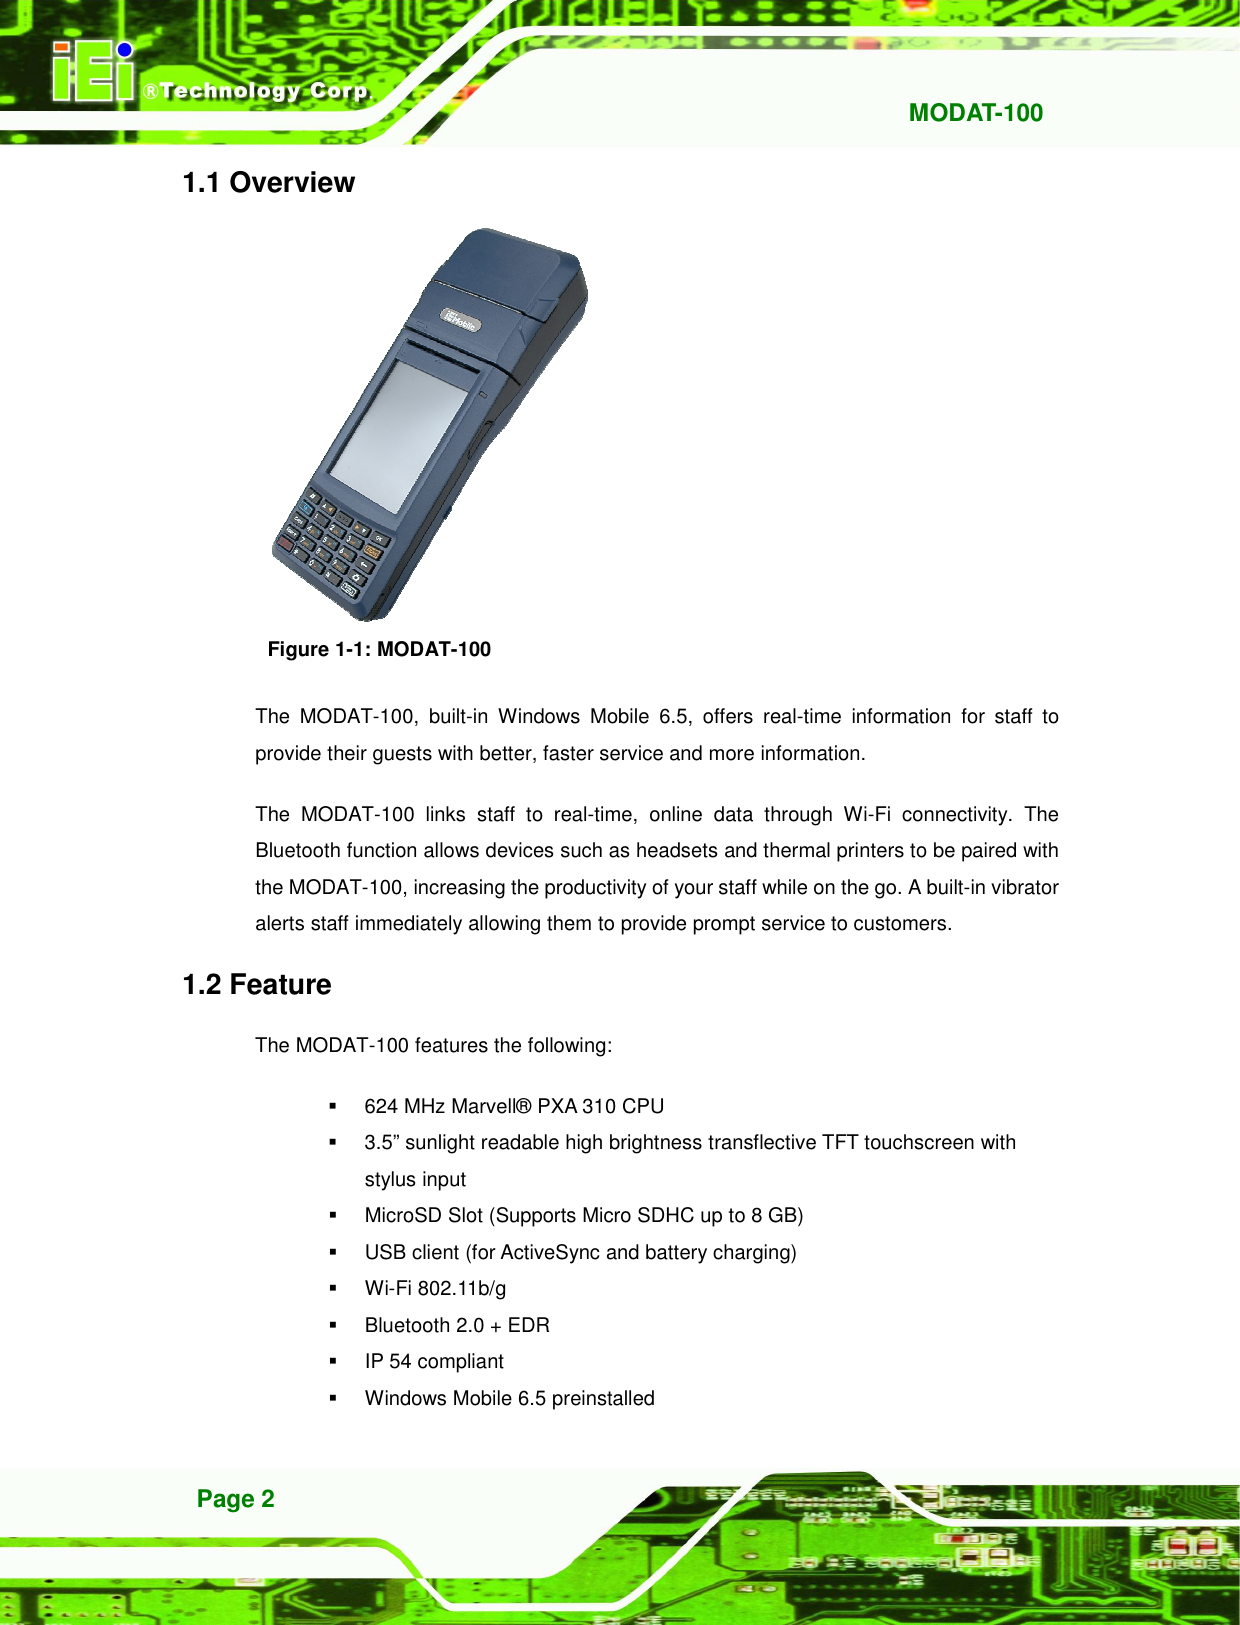   MODAT-100 Page 2 1.1 Overview  Figure 1-1: MODAT-100 The  MODAT-100,  built-in  Windows  Mobile  6.5,  offers  real-time  information  for  staff  to provide their guests with better, faster service and more information.   The  MODAT-100  links  staff  to  real-time,  online  data  through  Wi-Fi  connectivity.  The Bluetooth function allows devices such as headsets and thermal printers to be paired with the MODAT-100, increasing the productivity of your staff while on the go. A built-in vibrator alerts staff immediately allowing them to provide prompt service to customers. 1.2 Feature The MODAT-100 features the following:   624 MHz Marvell® PXA 310 CPU   3.5” sunlight readable high brightness transflective TFT touchscreen with stylus input     MicroSD Slot (Supports Micro SDHC up to 8 GB)   USB client (for ActiveSync and battery charging)   Wi-Fi 802.11b/g   Bluetooth 2.0 + EDR   IP 54 compliant   Windows Mobile 6.5 preinstalled 